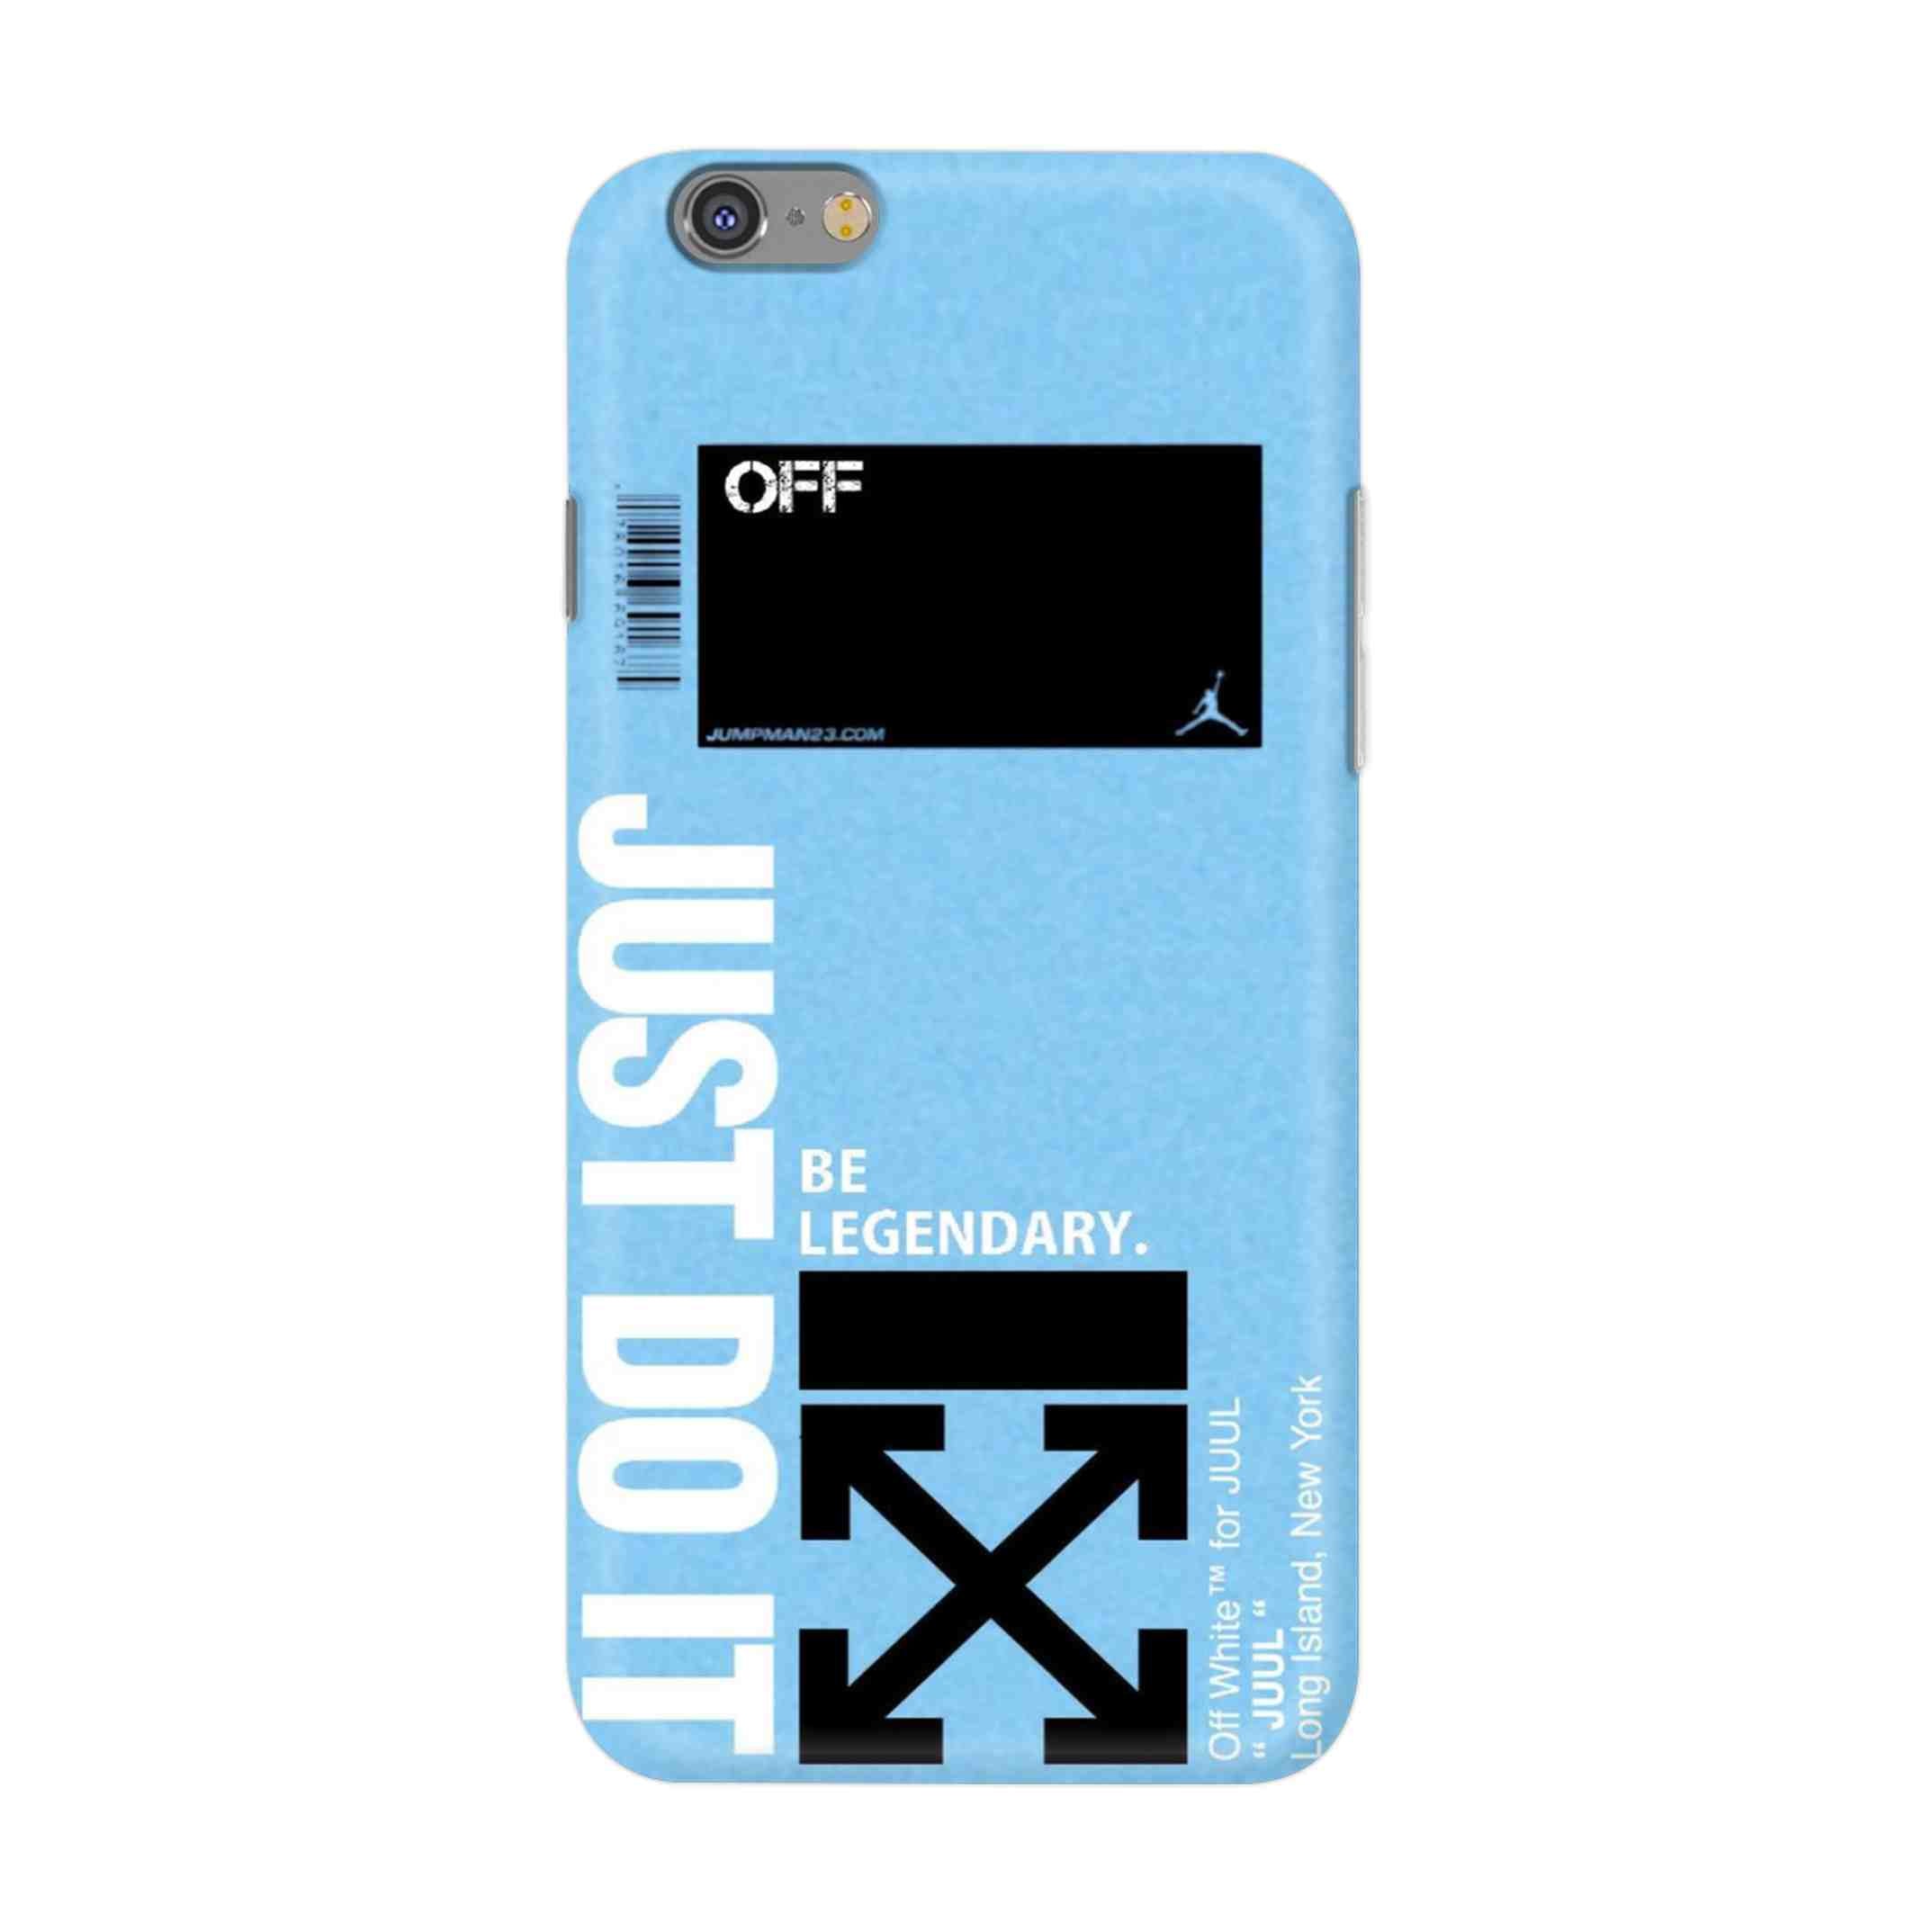 Buy Just Do It Hard Back Mobile Phone Case/Cover For iPhone 6 / 6s Online